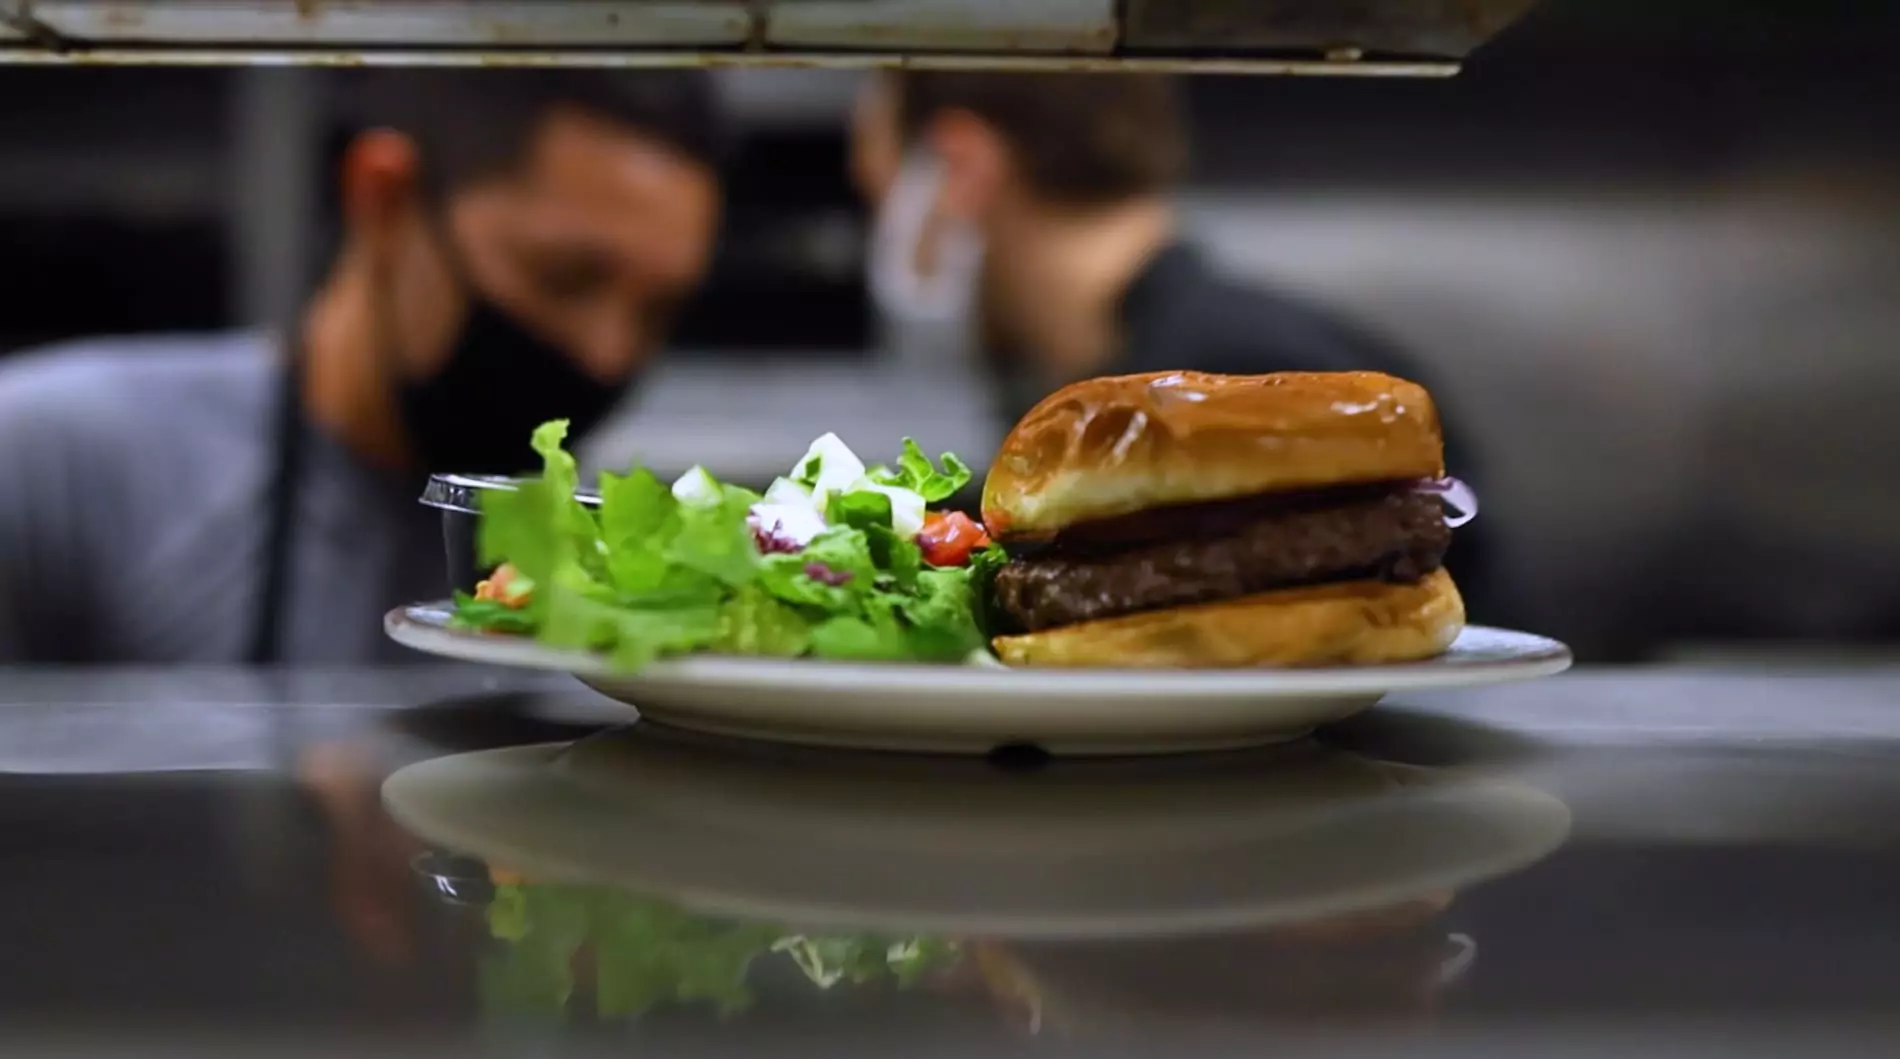 Hamburger photographed on the pass at Ivy on the Square with two chefs in the background